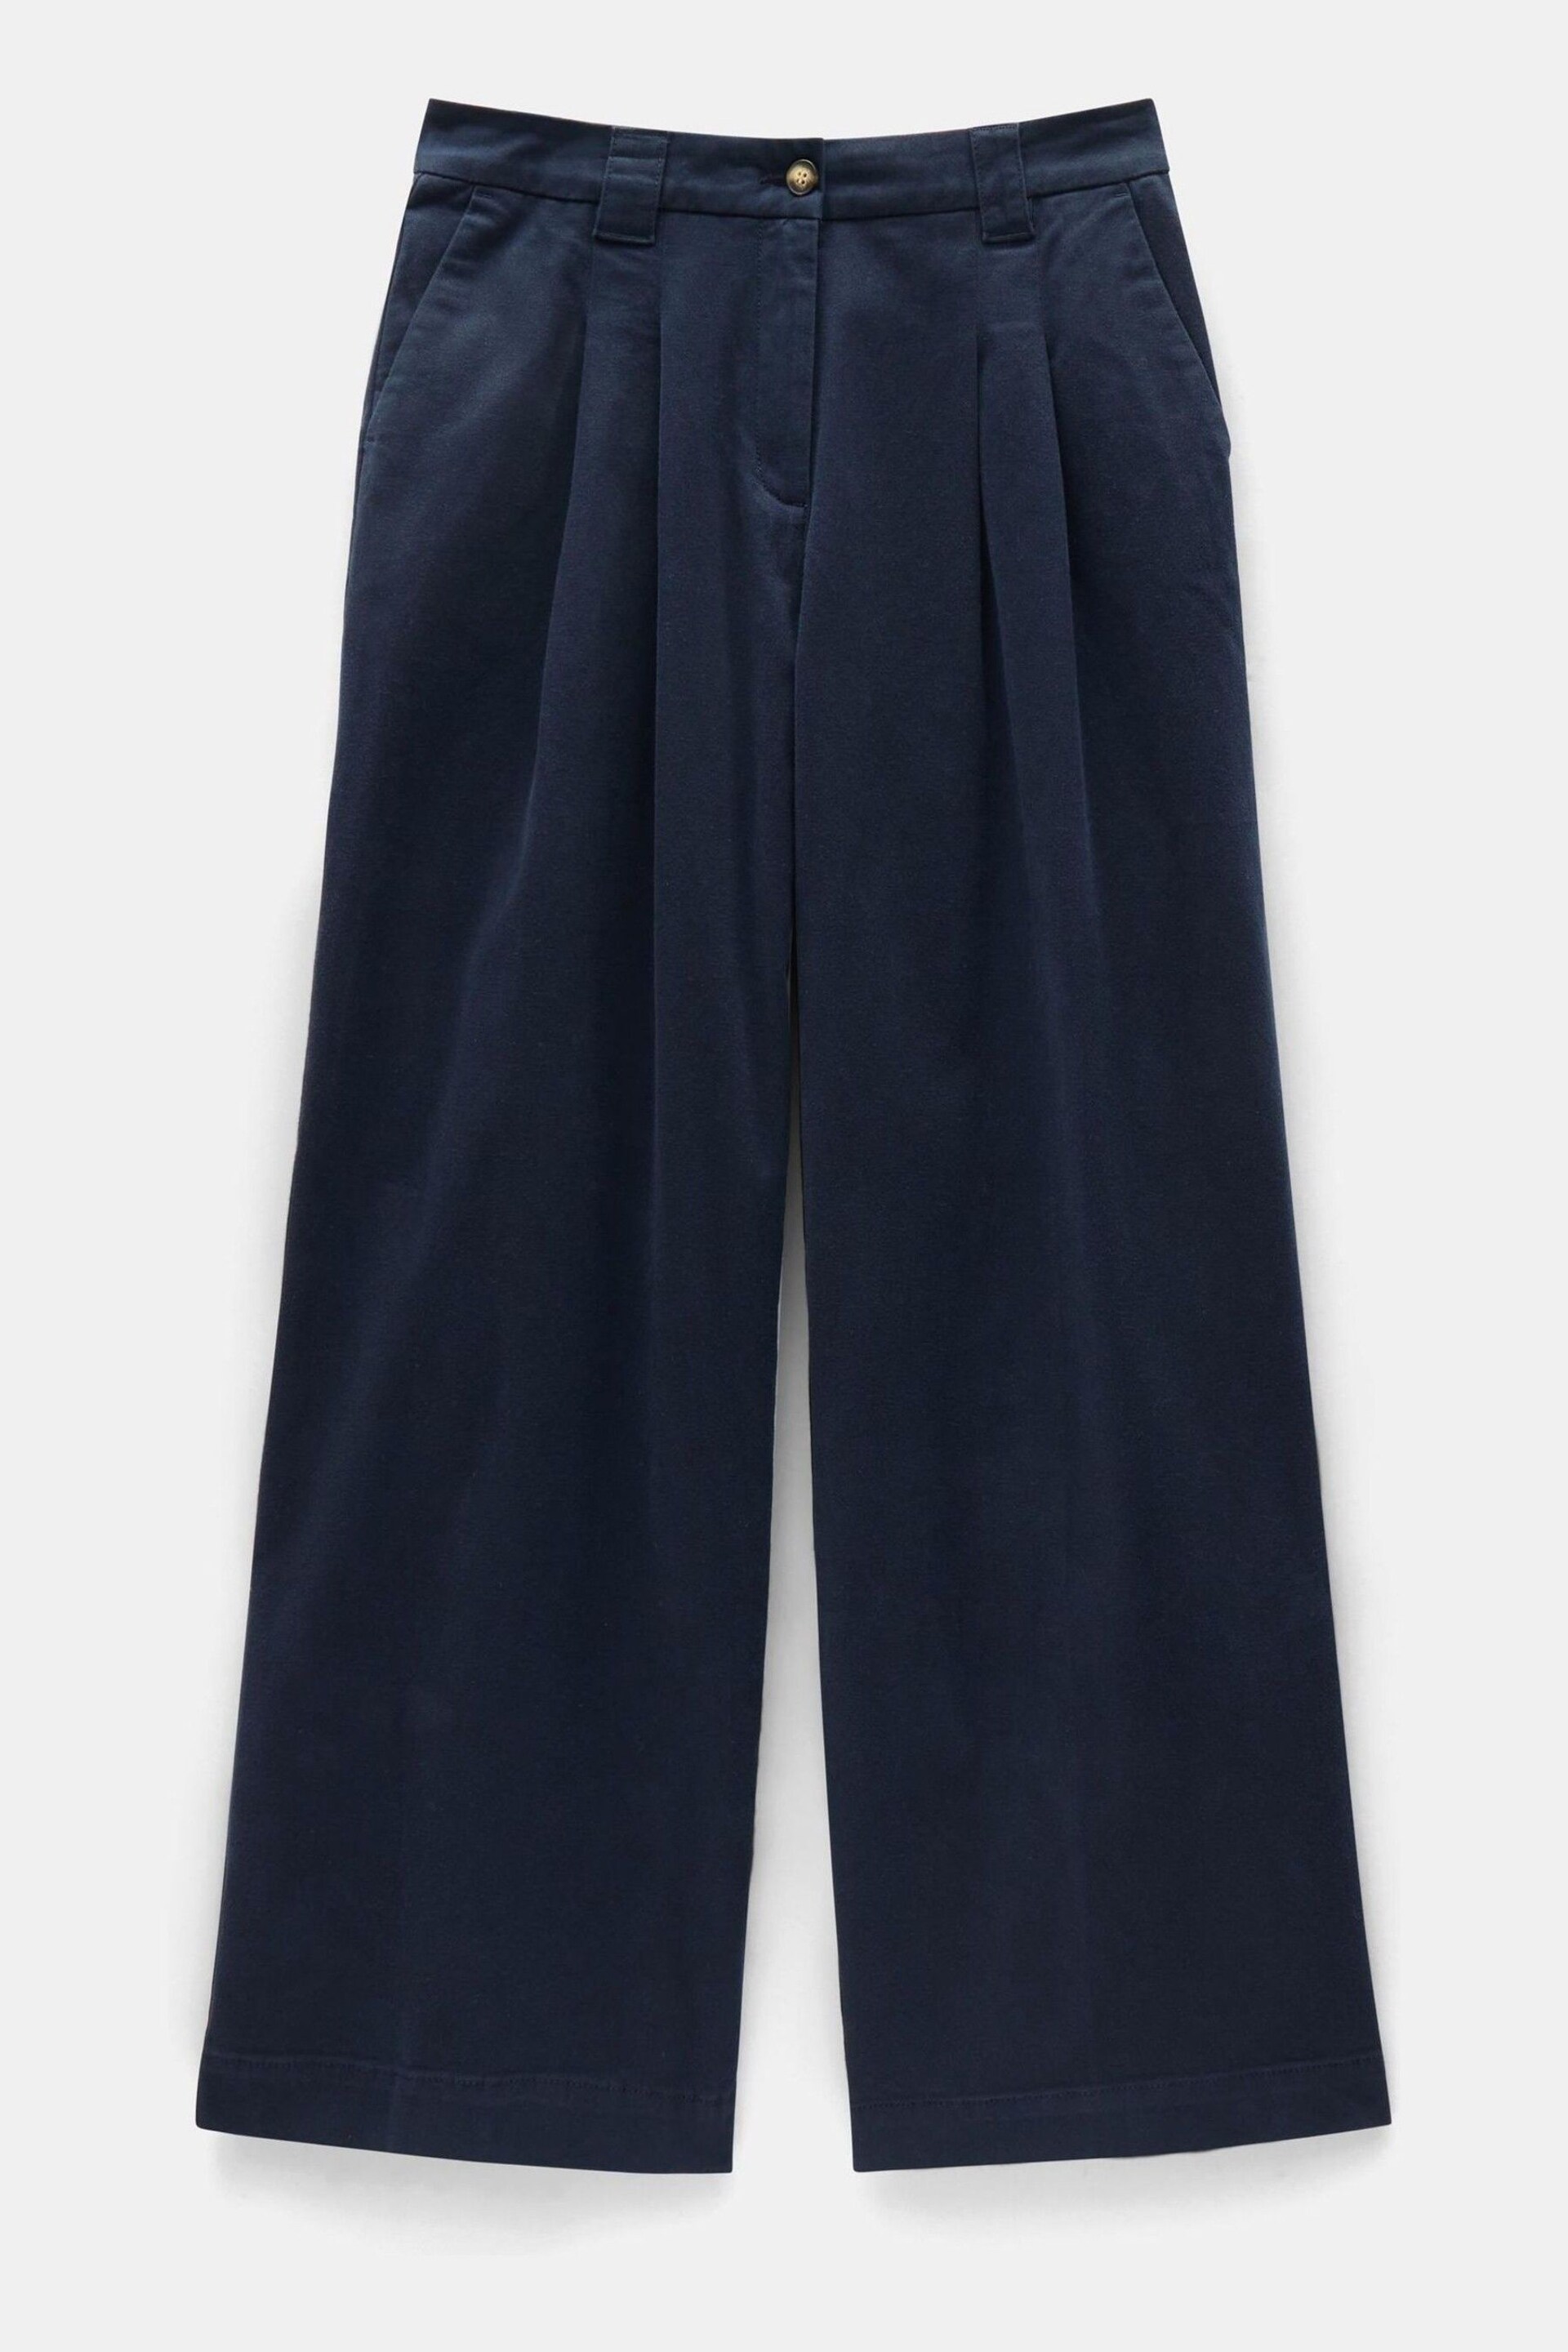 Hush Blue Ali Wide Chino Trousers - Image 5 of 5